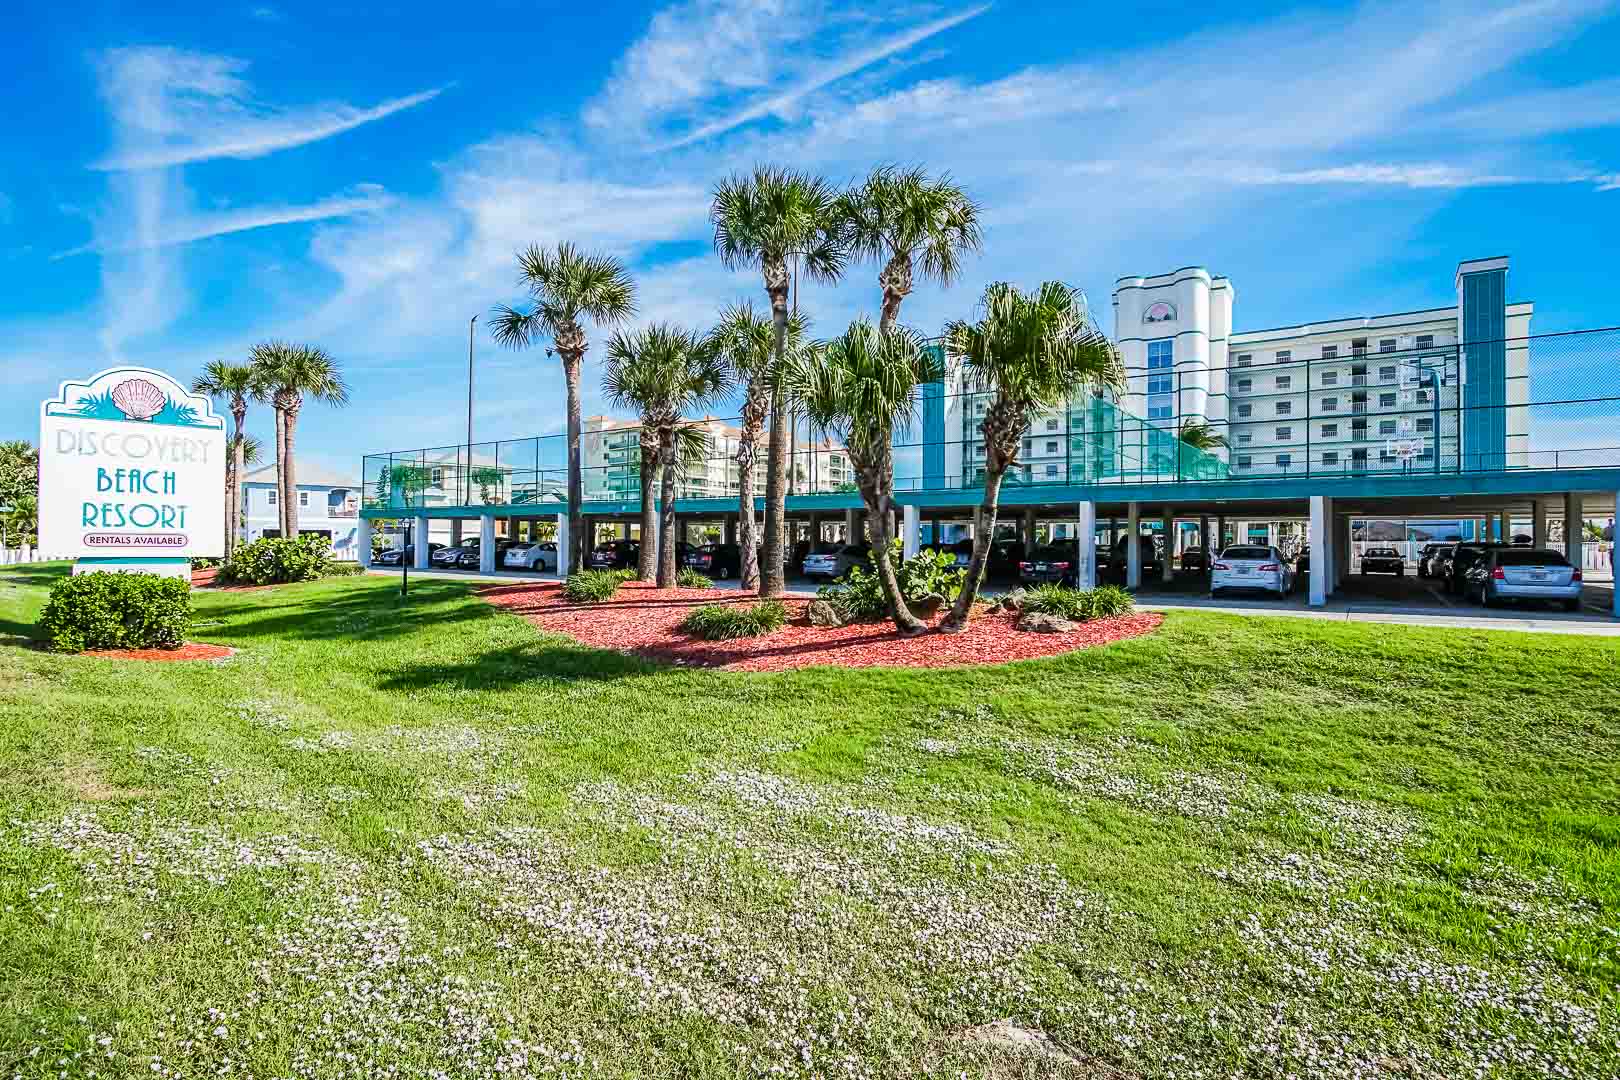 An expansive view of VRI's Discovery Beach Resort in Cocoa Beach, Florida.